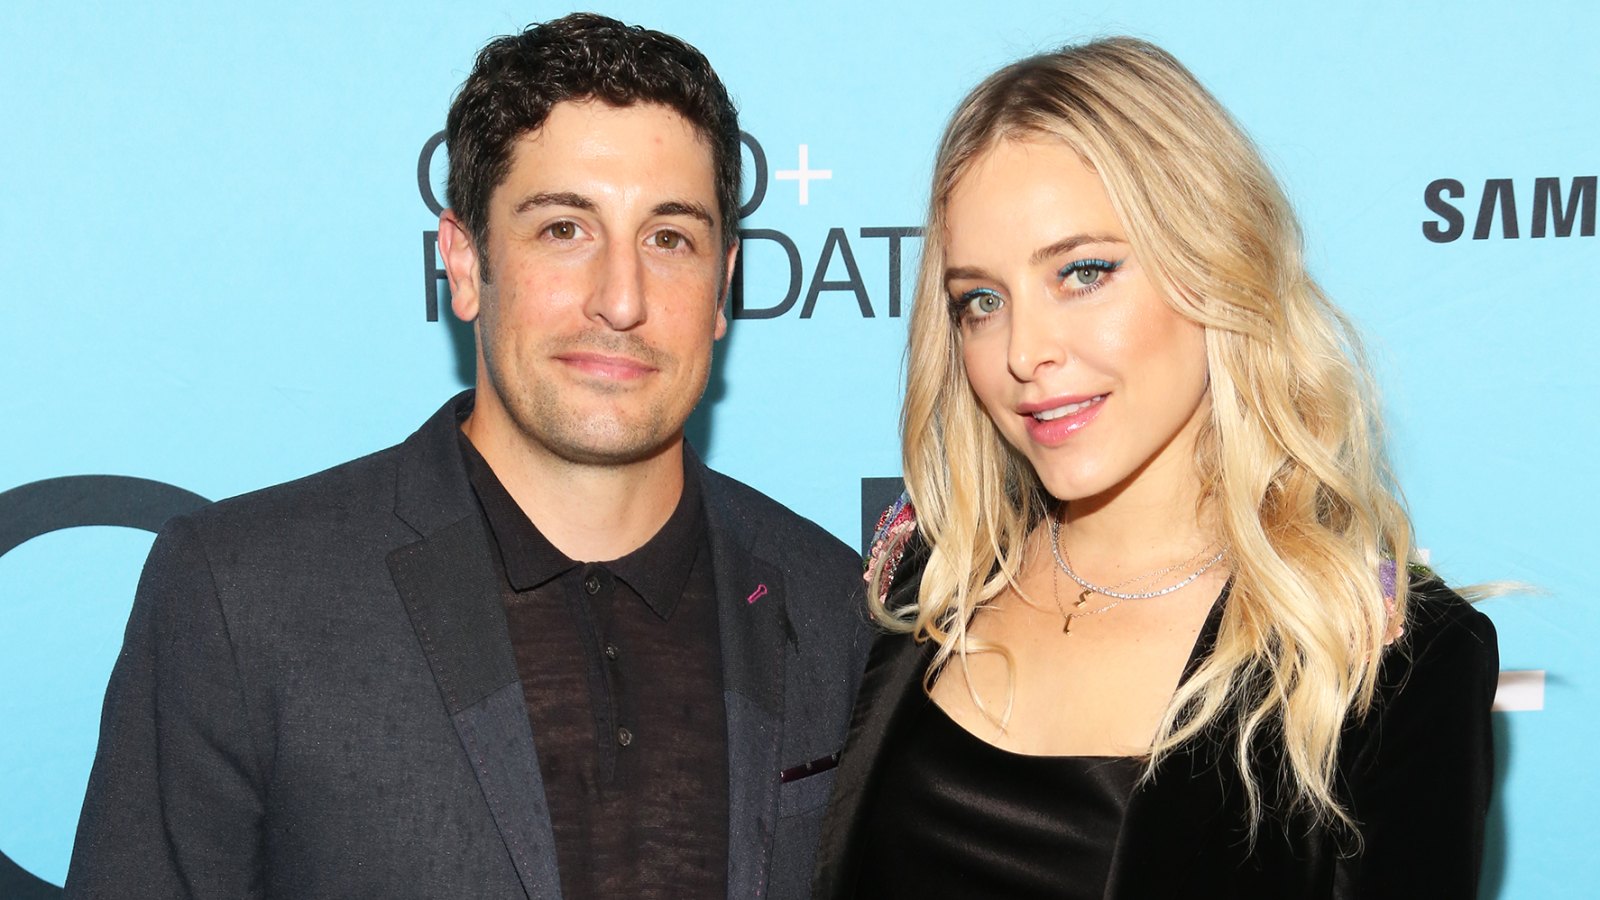 All About Jenny Mollen's Husband And Their Relationship